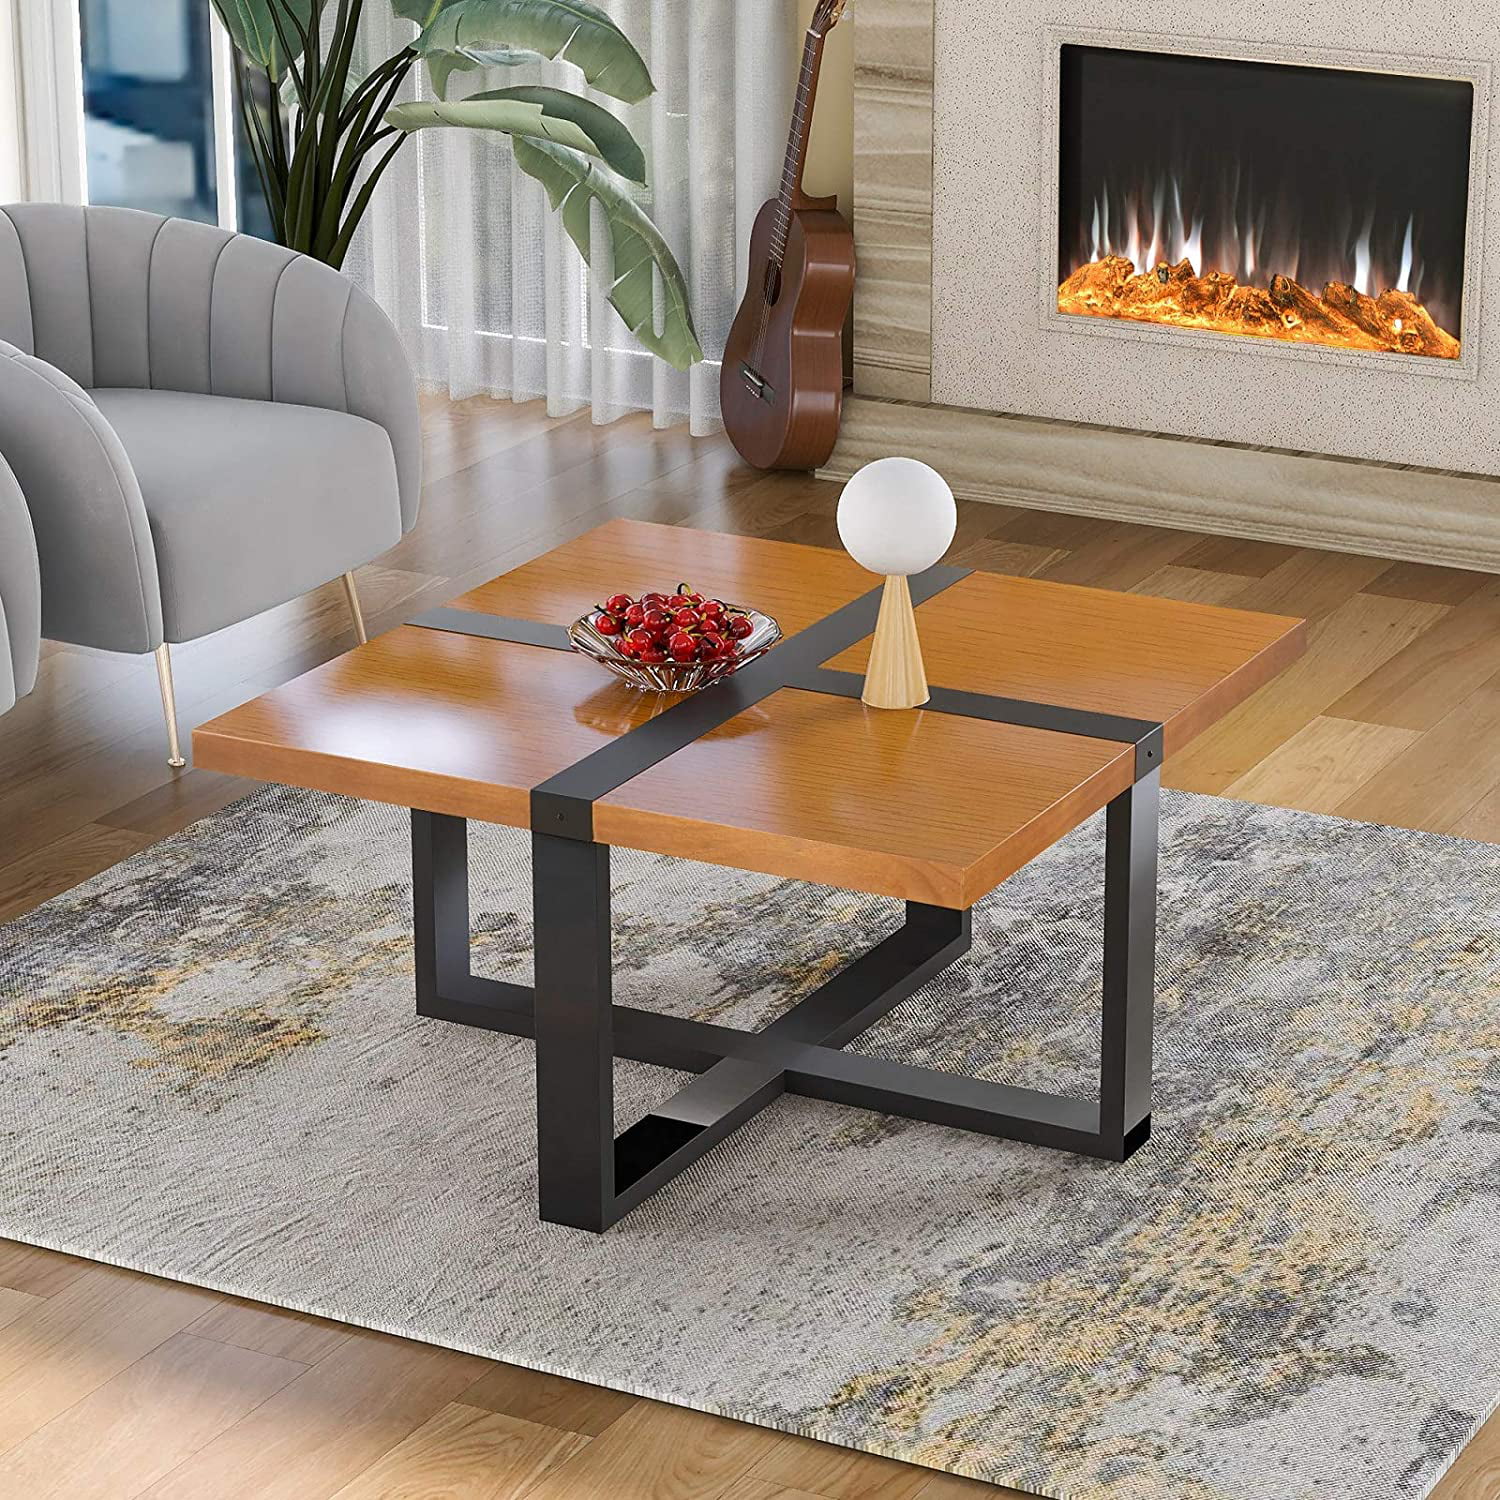 Buy 37.4-inch Solid Wood Farmhouse Coffee Table with Crossed-Shape